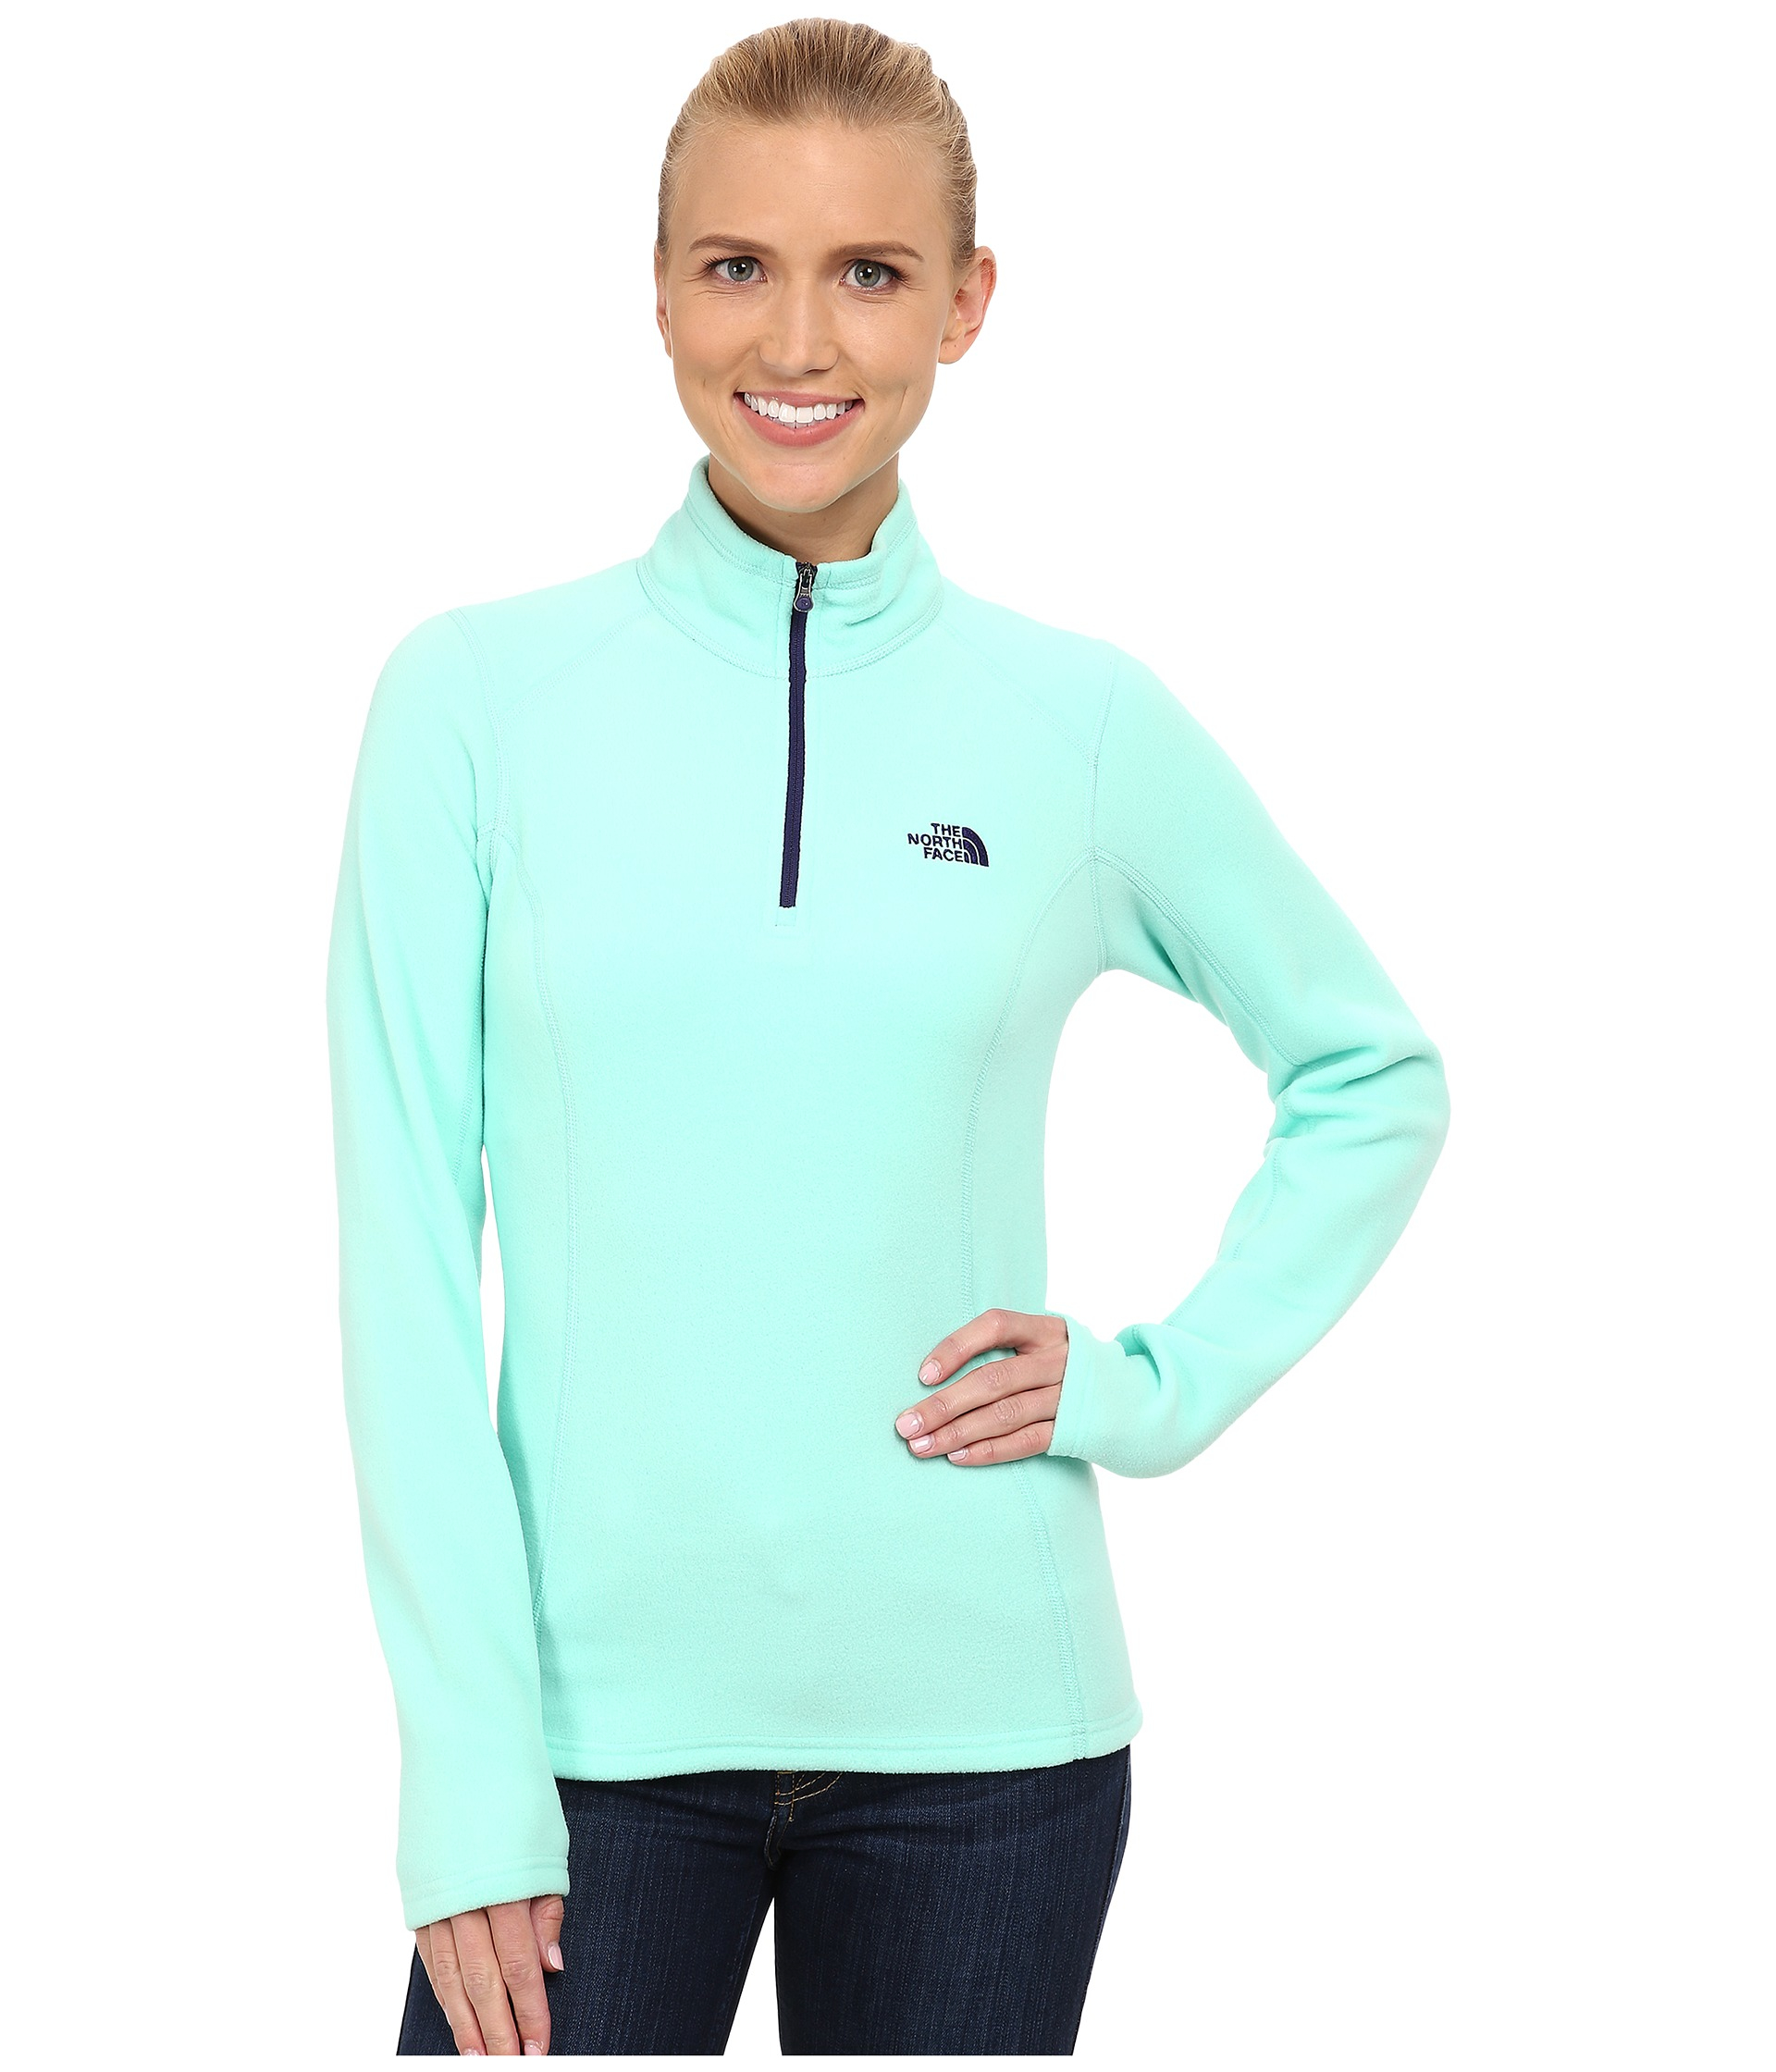 north face 1 4 zip pullover women's